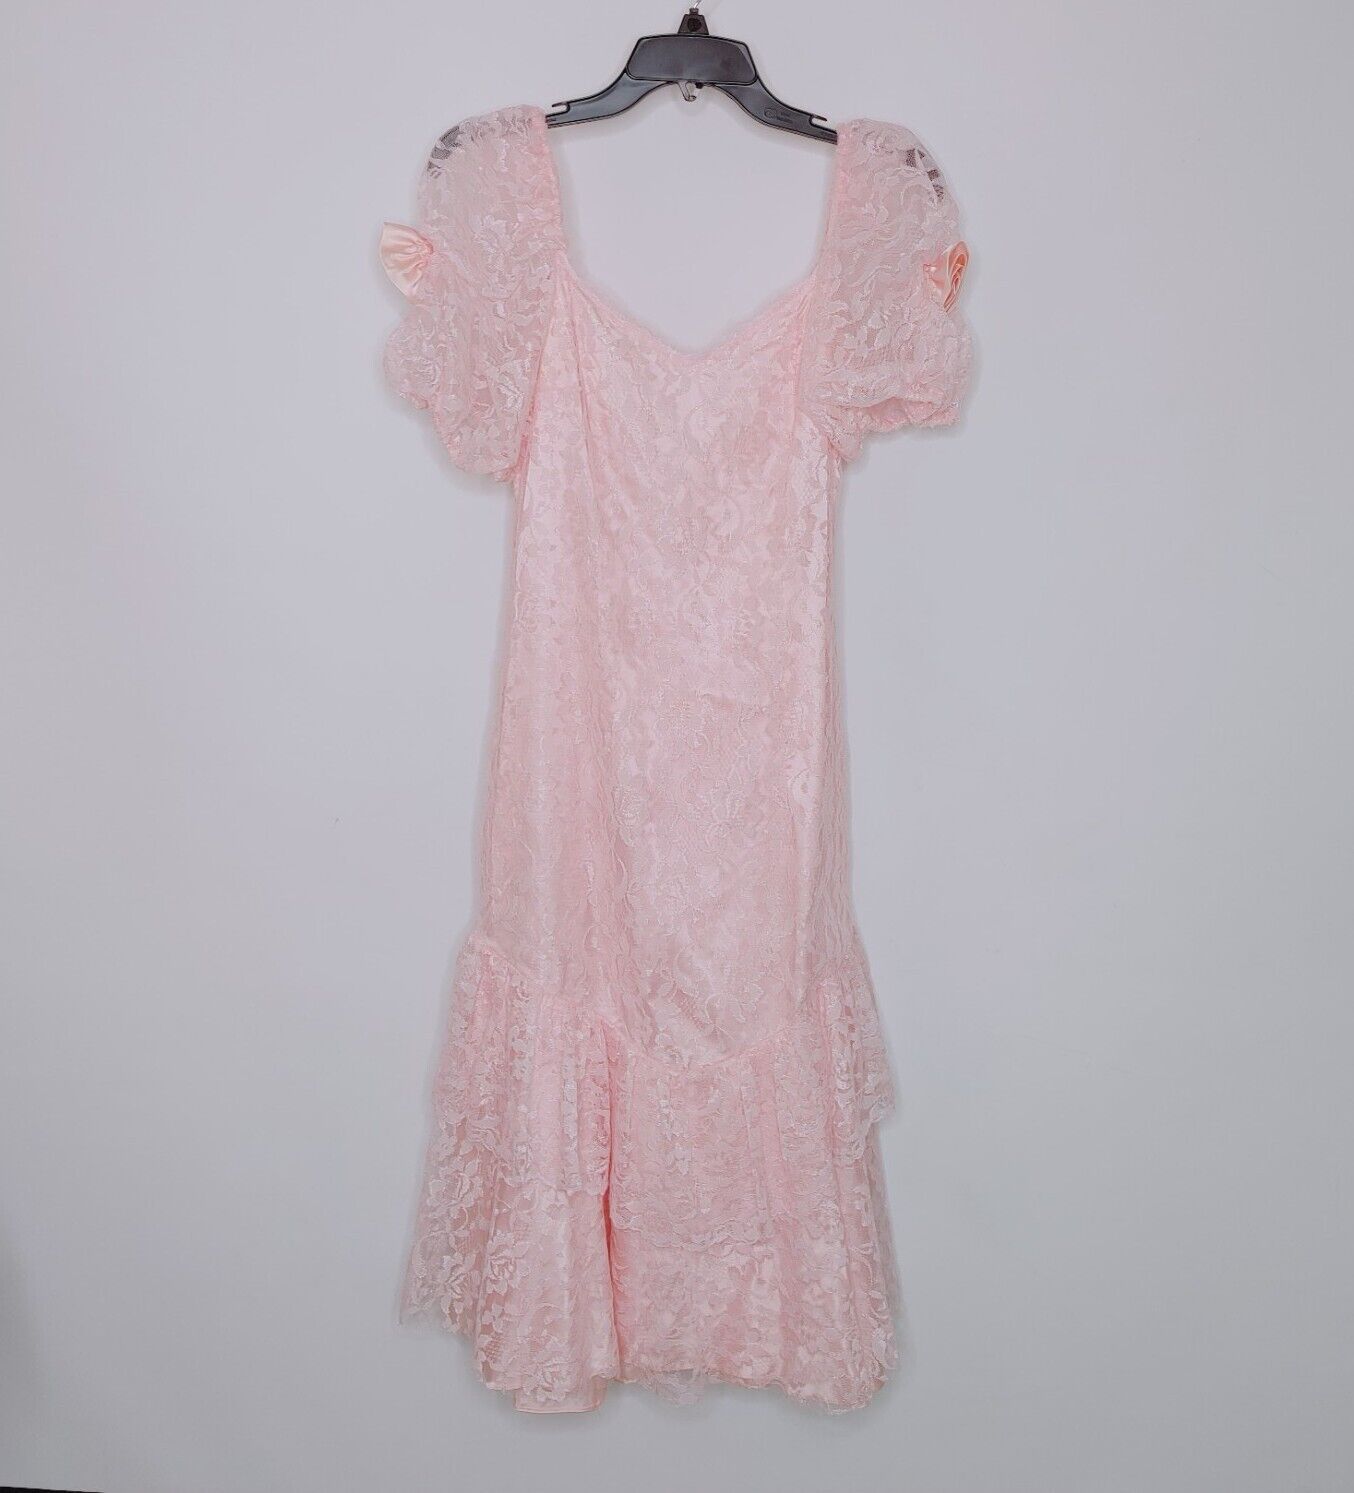 Vintage 80s Pink Lace Dress Size 7/8 Union Made Puff Sleeves